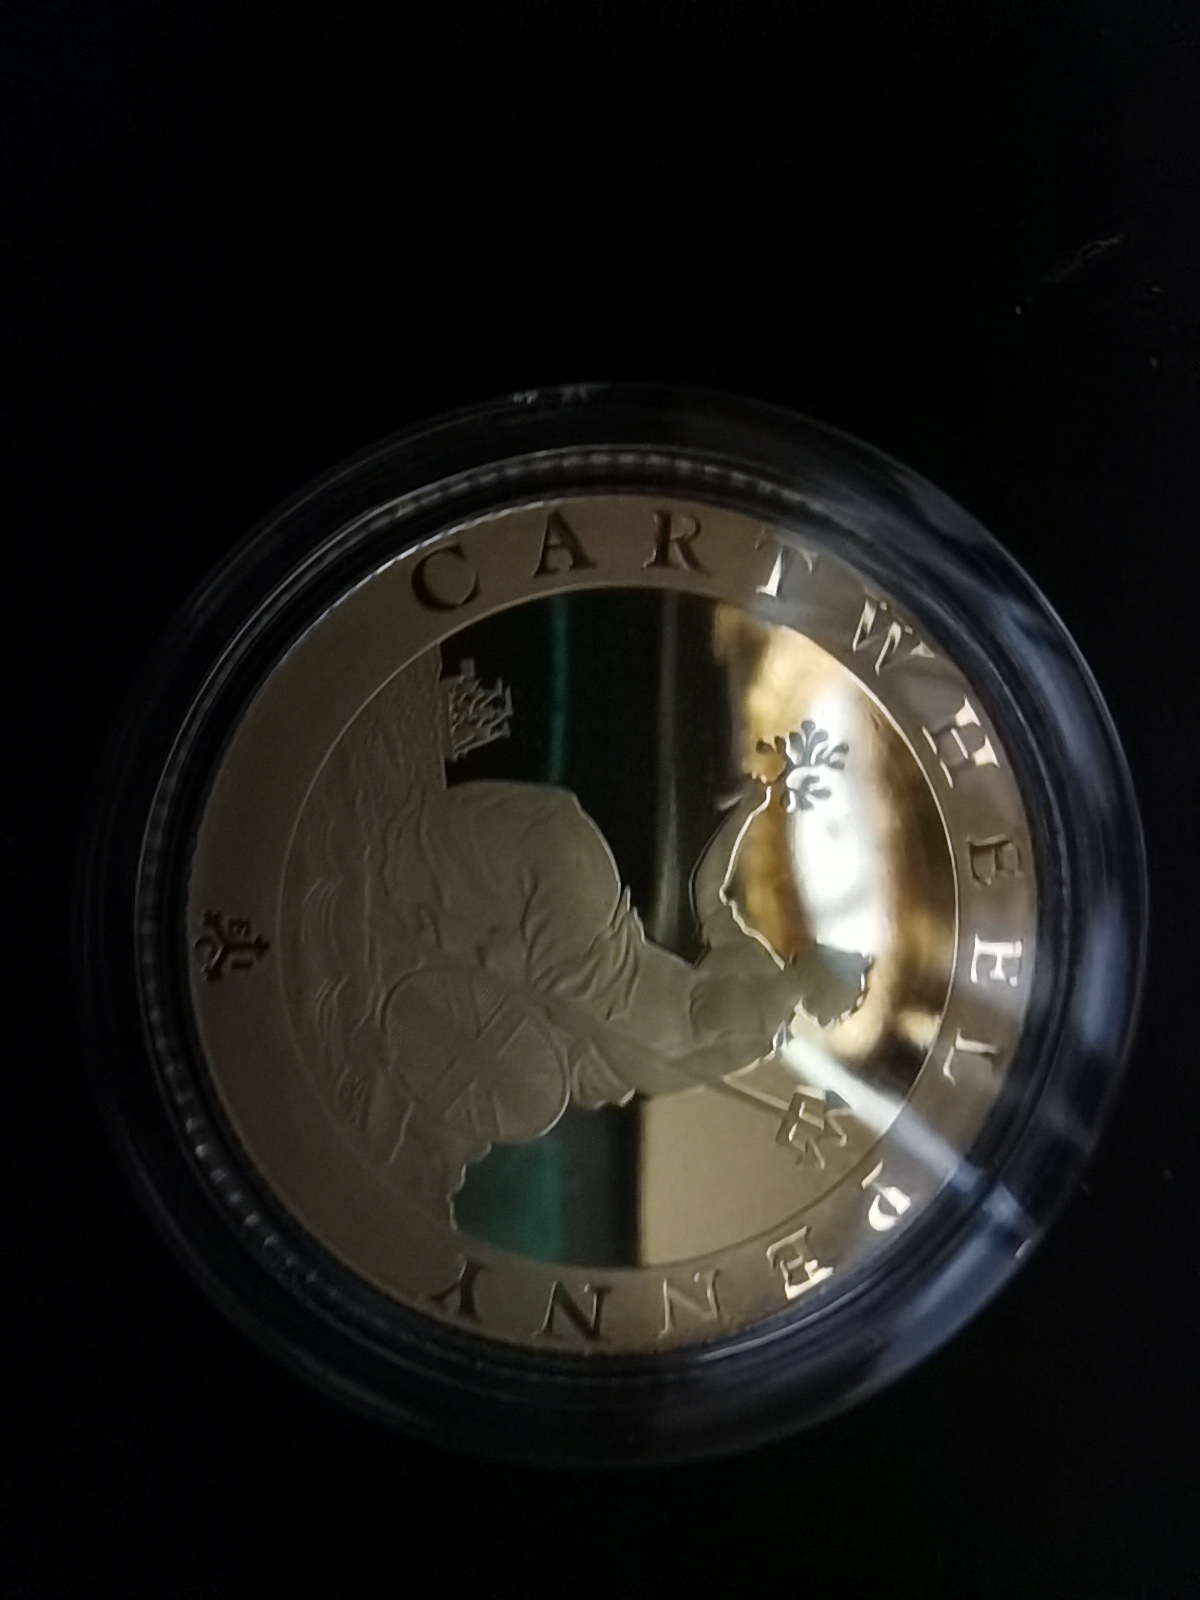 The 2019 East India company gold proof Empire coll - Image 6 of 14